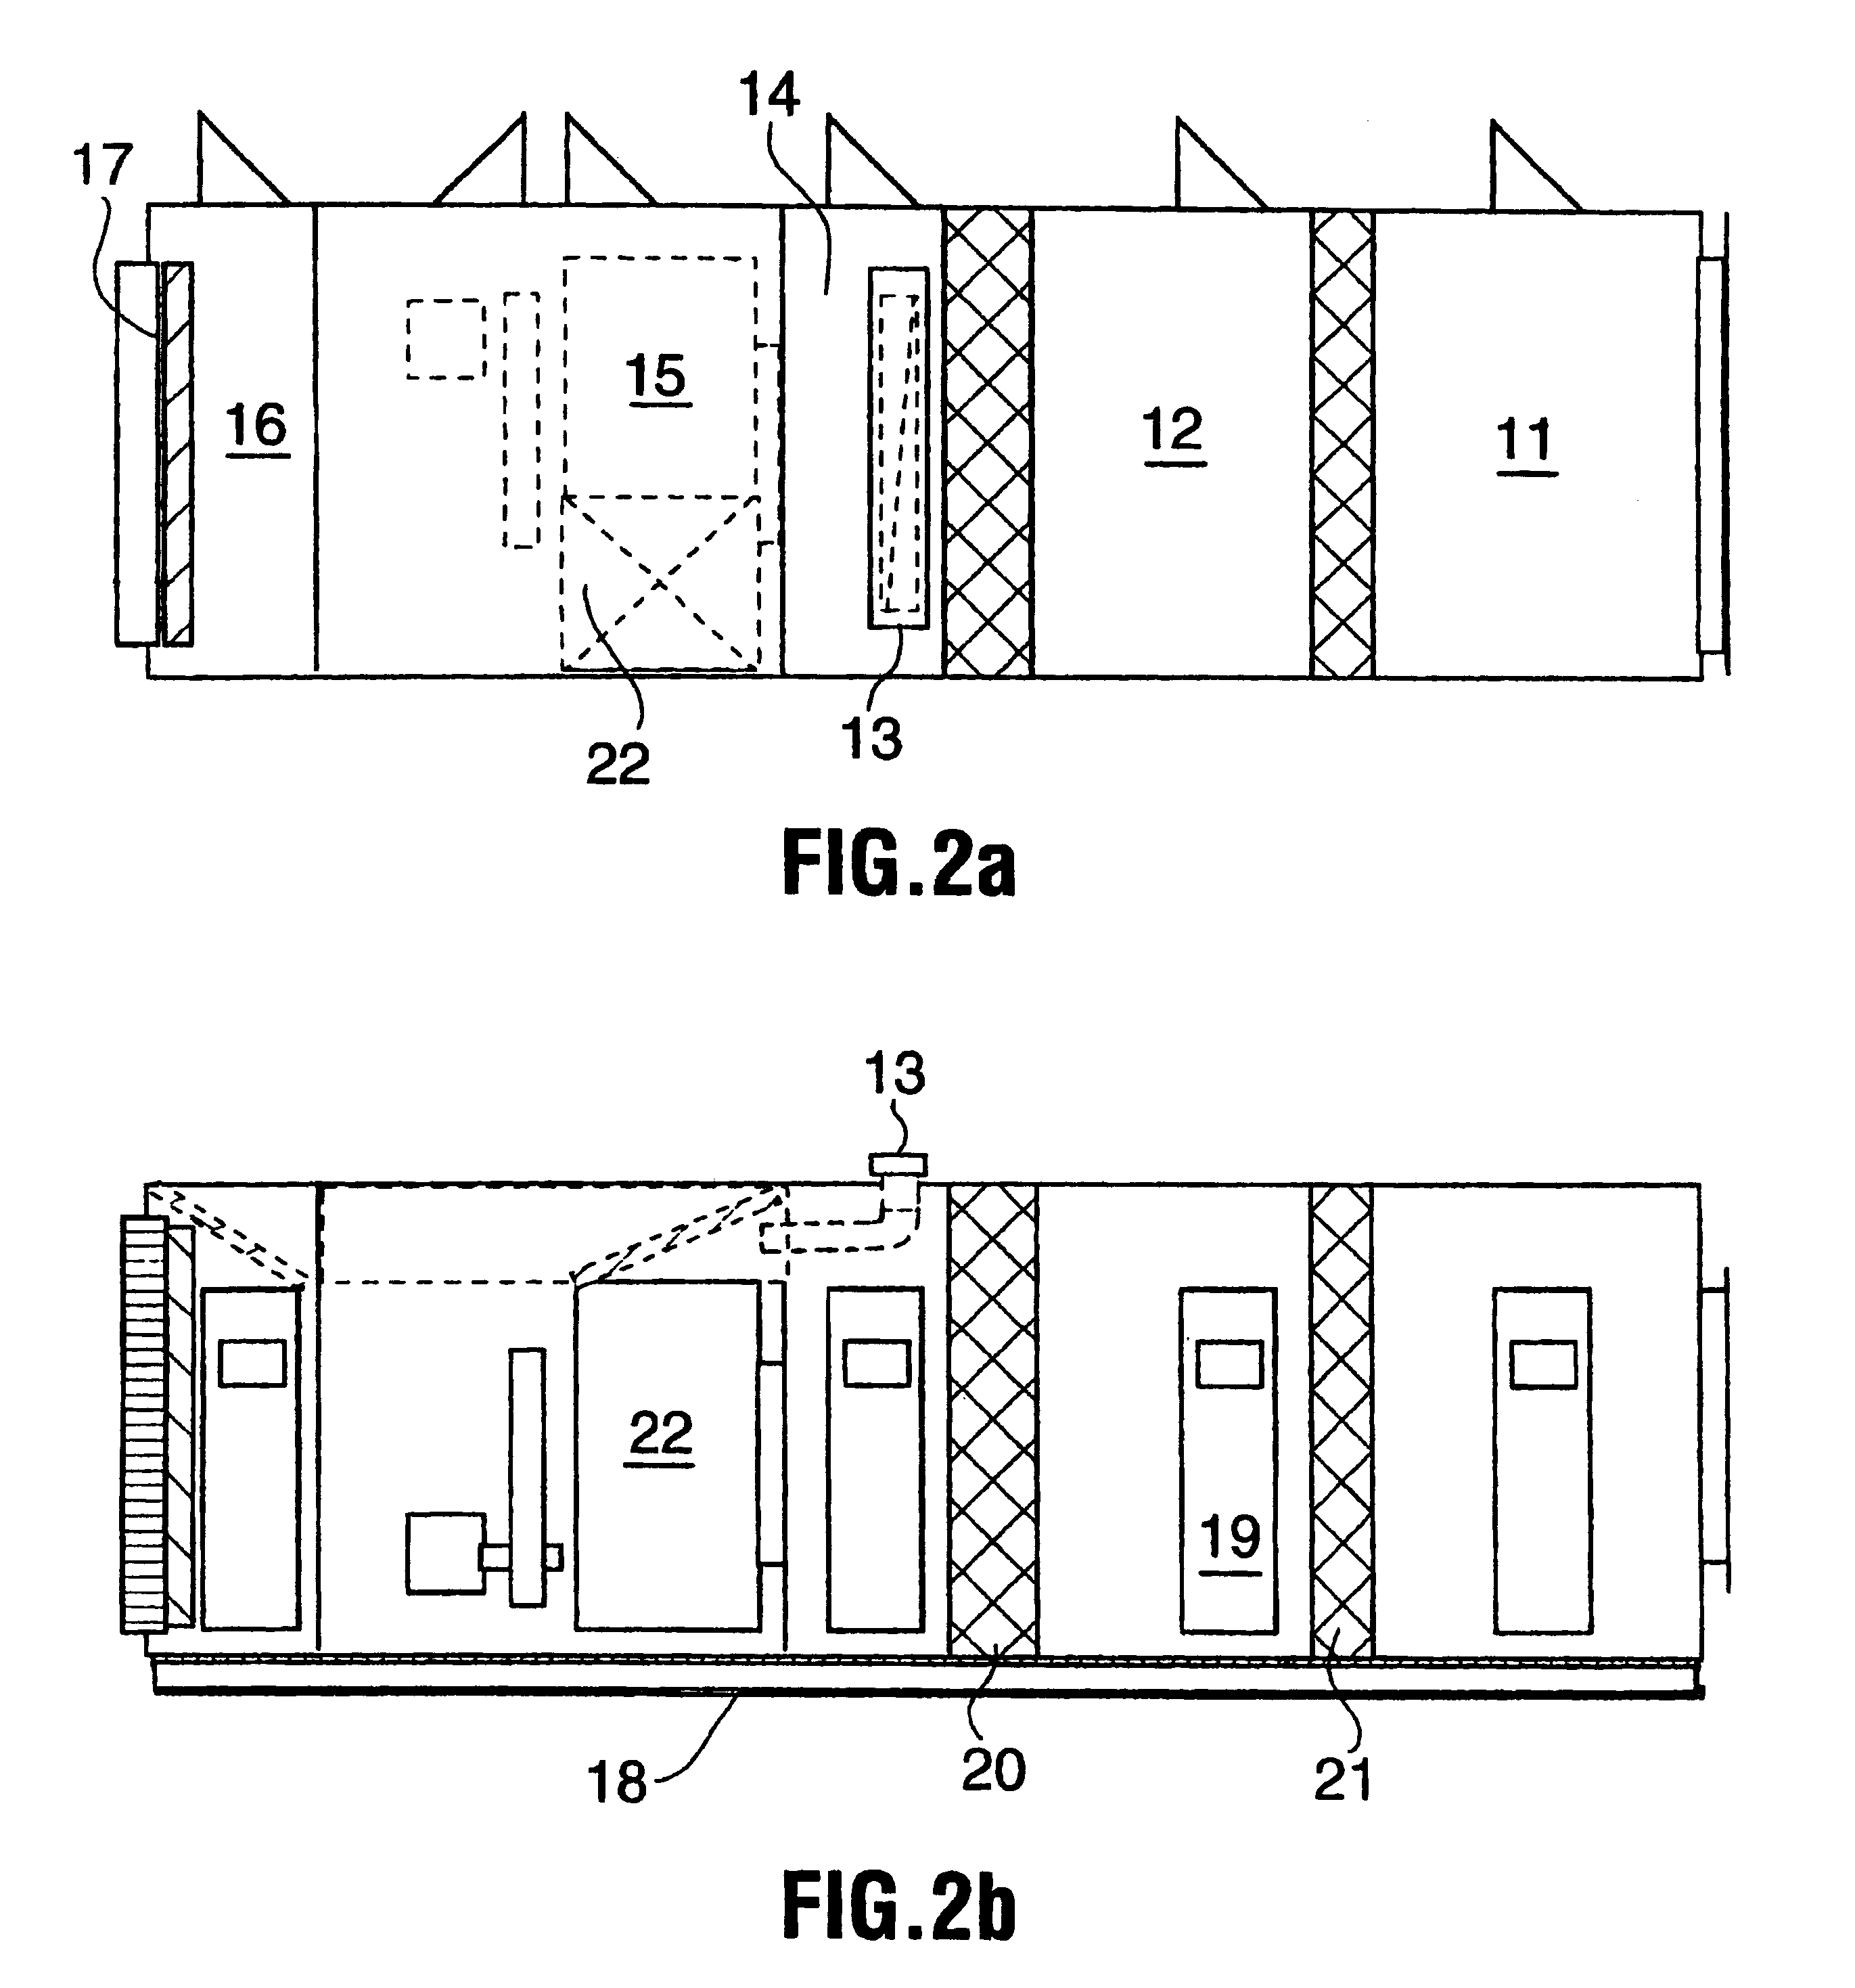 Heat recovery and pollution abatement device